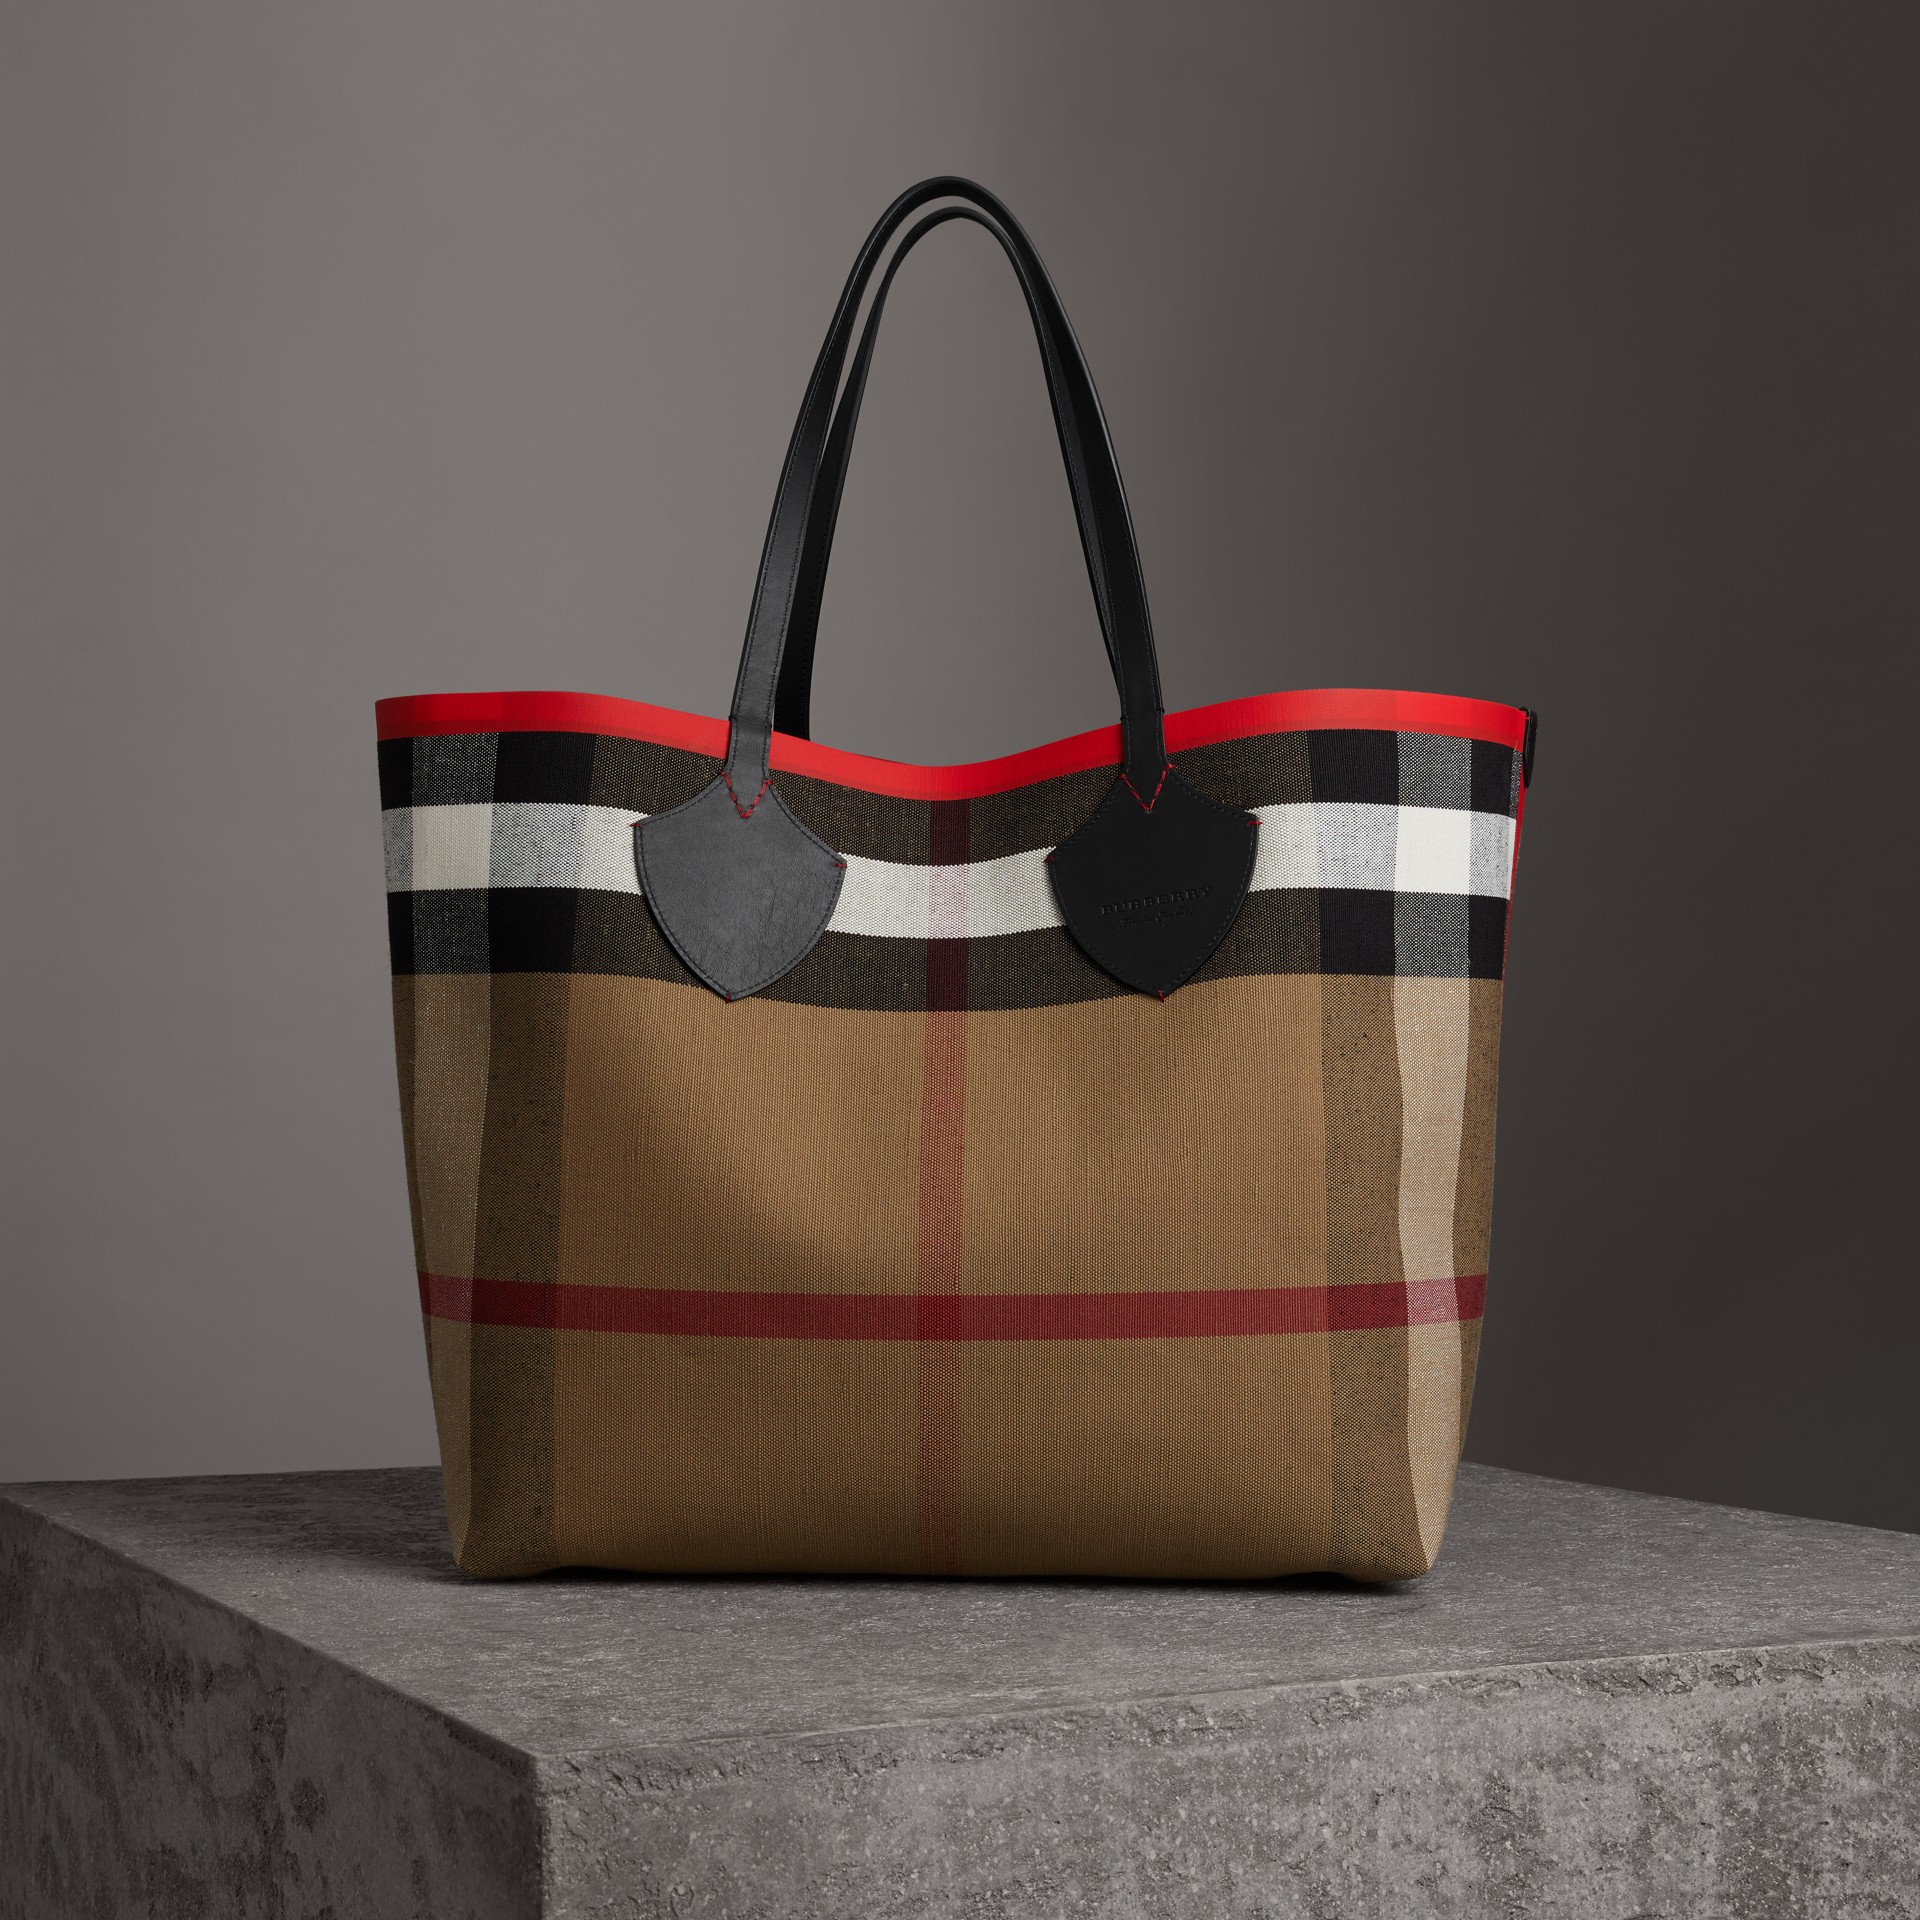 Authentic Burberry Navy/Red Check Tote Bag ~ Large ~